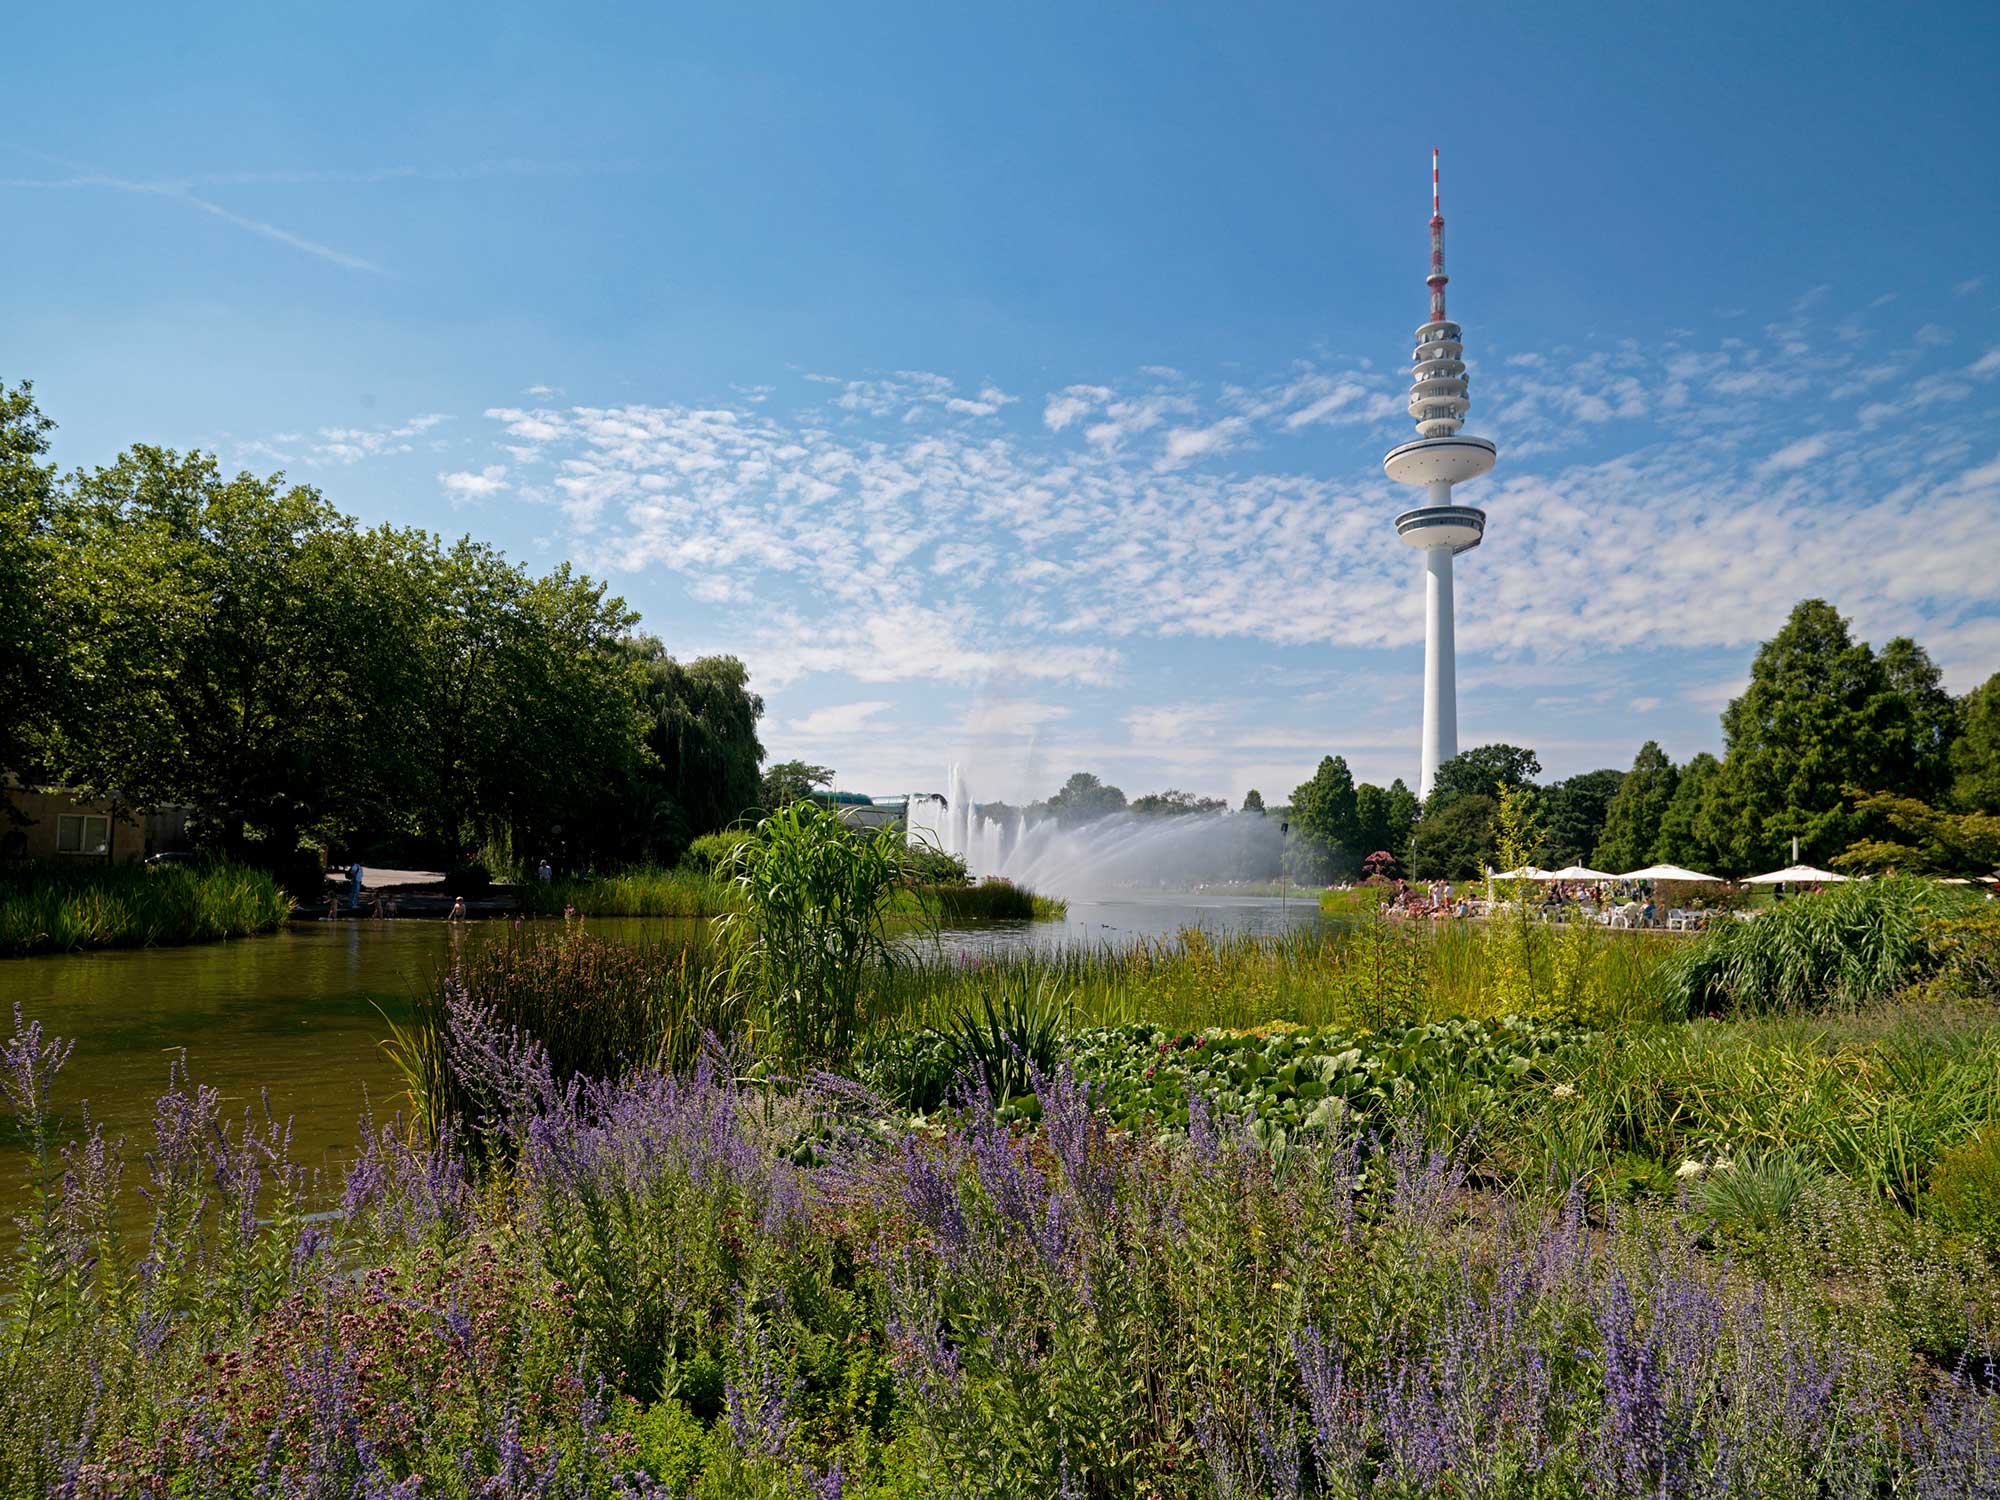 A sunny day at the park in Hamburg with the TV Tower, many flowers and a fountain over the river